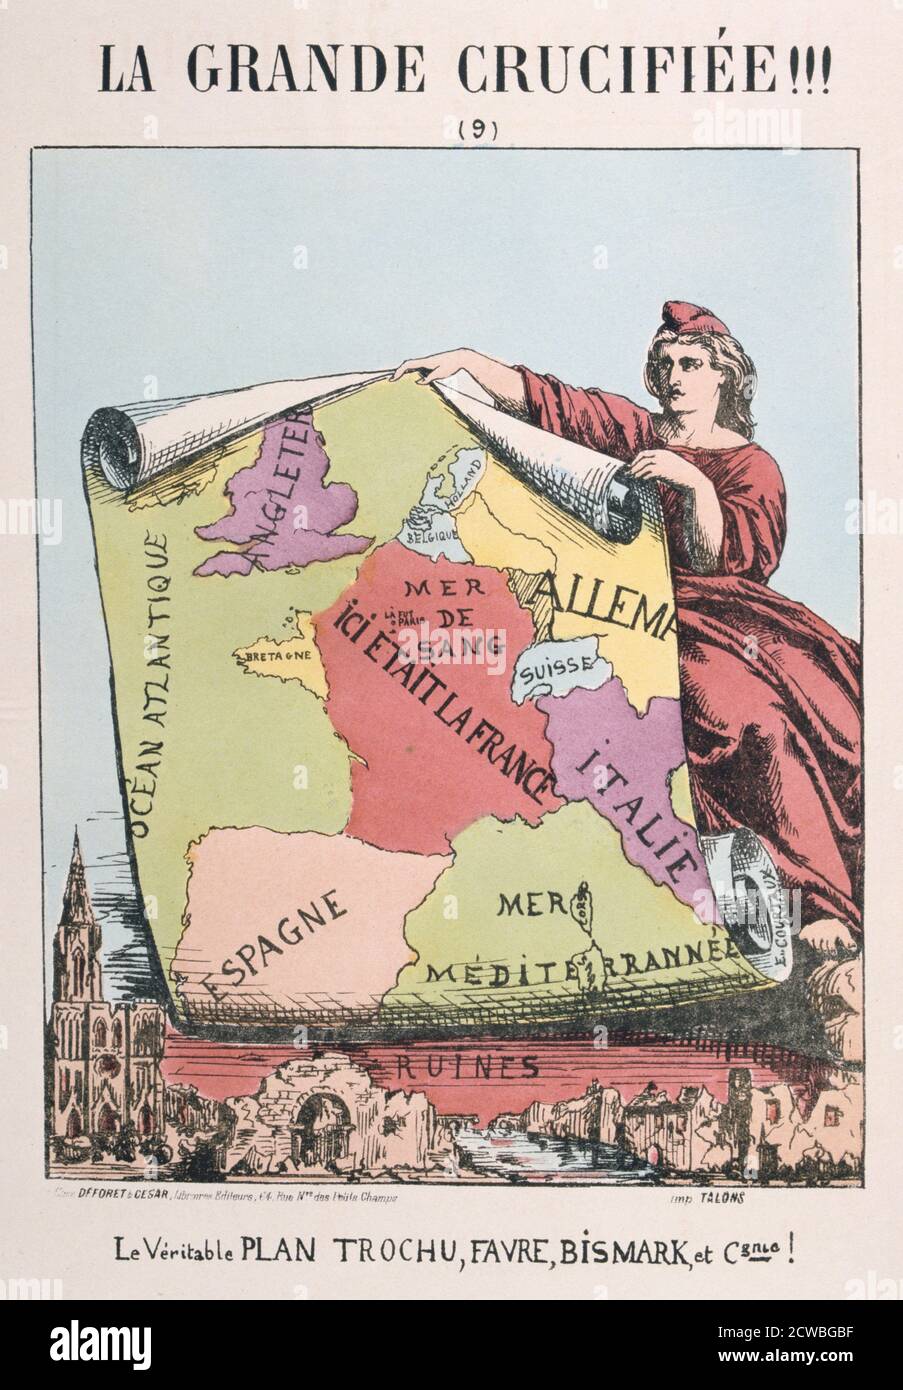 Allegory of Republican France, by E Courtaux, 1871. Cartoon from a series titled La Grande Crucifiee!!! depicting Marianne as Republican France. Here she holds up a map portraying France as a 'Mer de Sang' (sea of blood), as a result of the upheavals of the Franco-Prussian War and the Paris Commune. From a private collection. Stock Photo